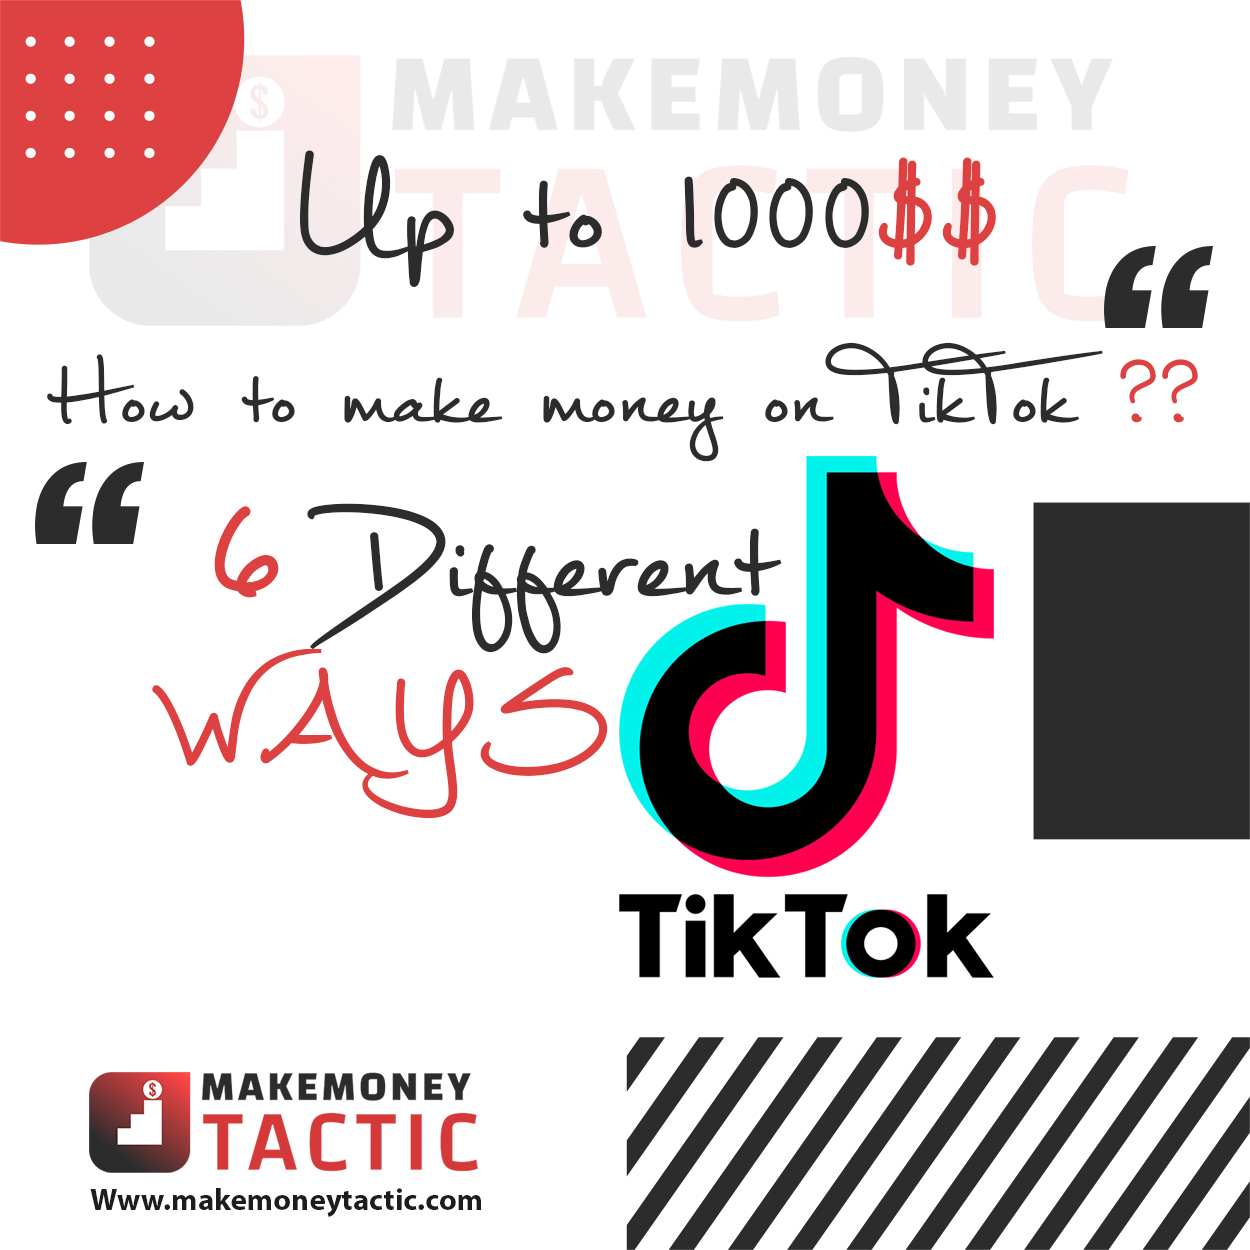 Earn money tiktok on how to How to